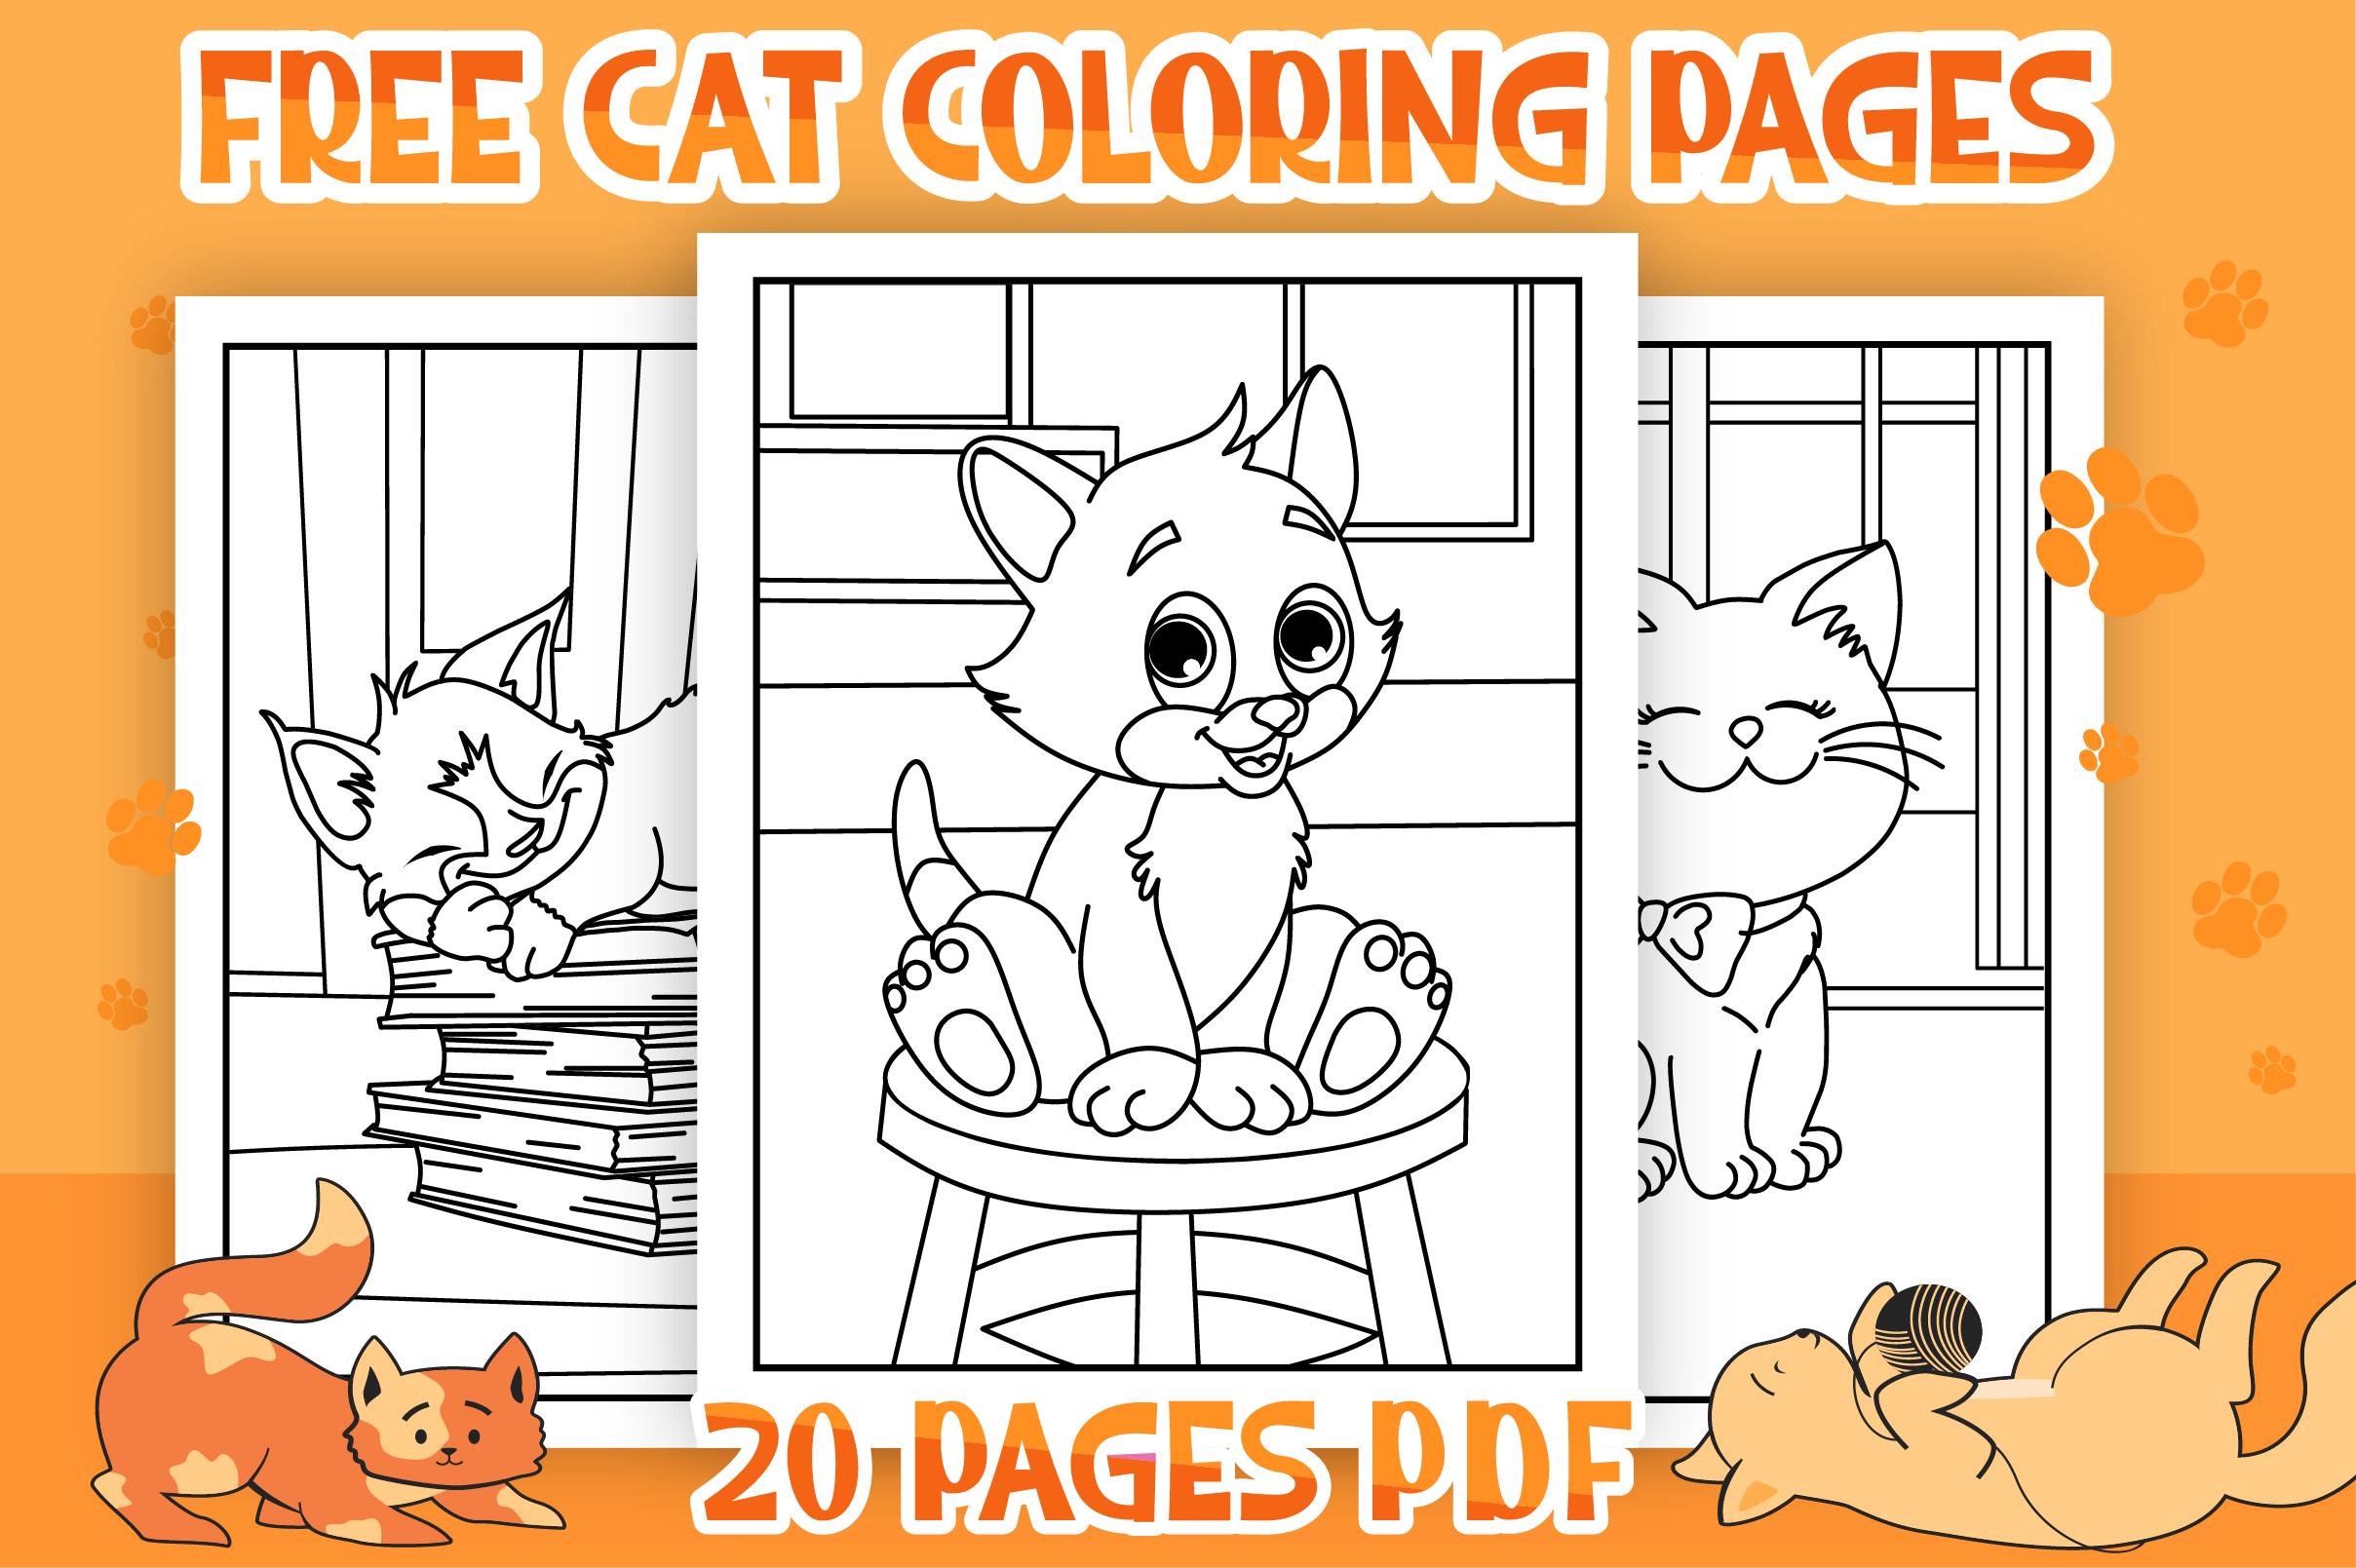 Free Printable Cute Cat Coloring Pages for Kids - Kawaii Cat Coloring Pages